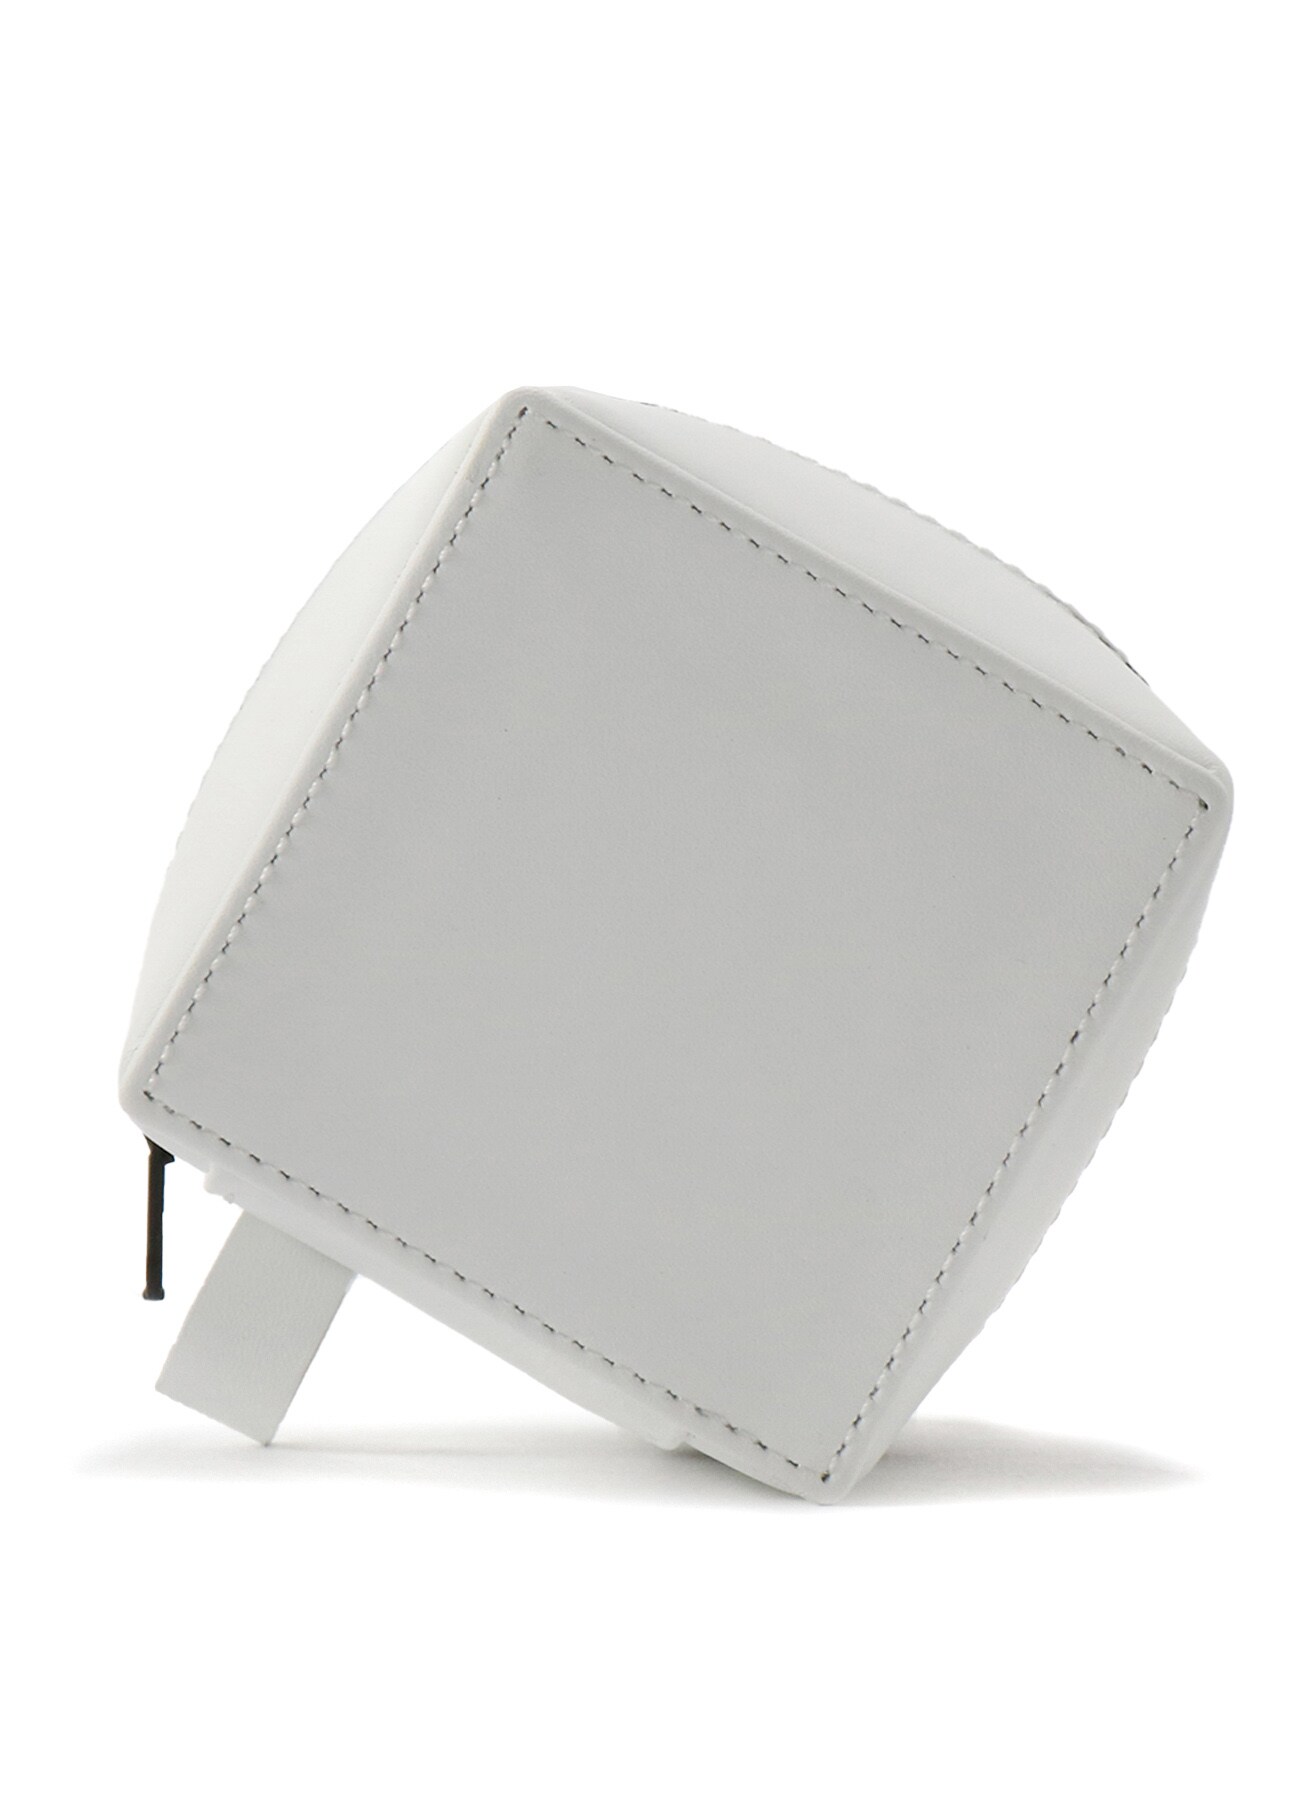 Rubber Touch Leather B Mini Cube Bag(FREE SIZE White): Vintage 1.1 